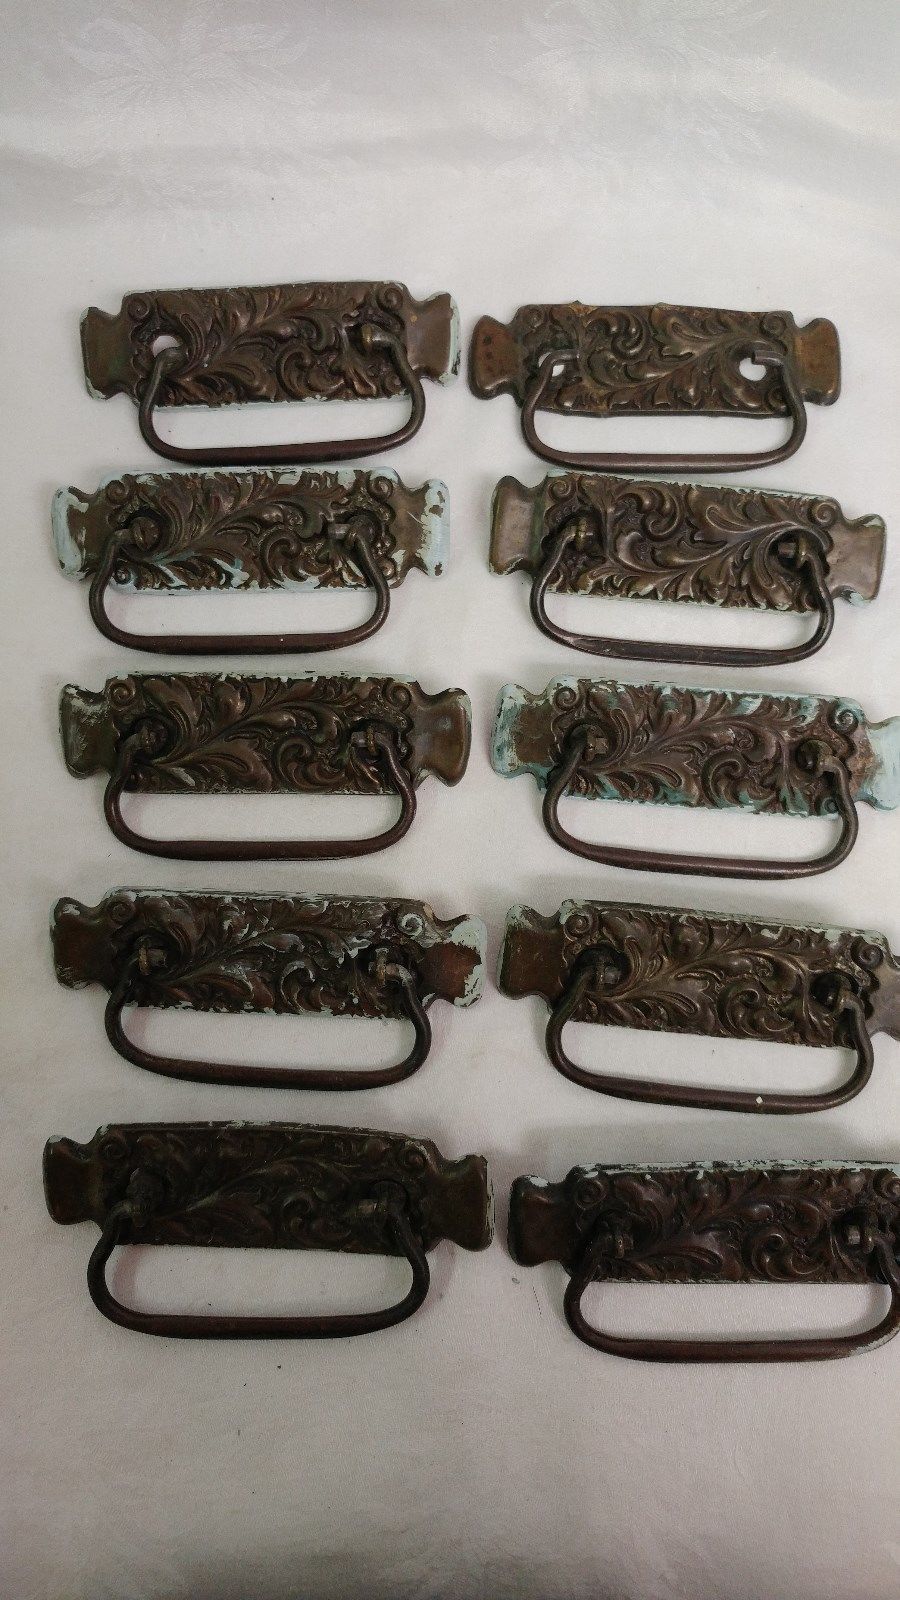 10 Antique Drawer Pulls, Hardware-Fancy Brass backplates with steel bails NICE!